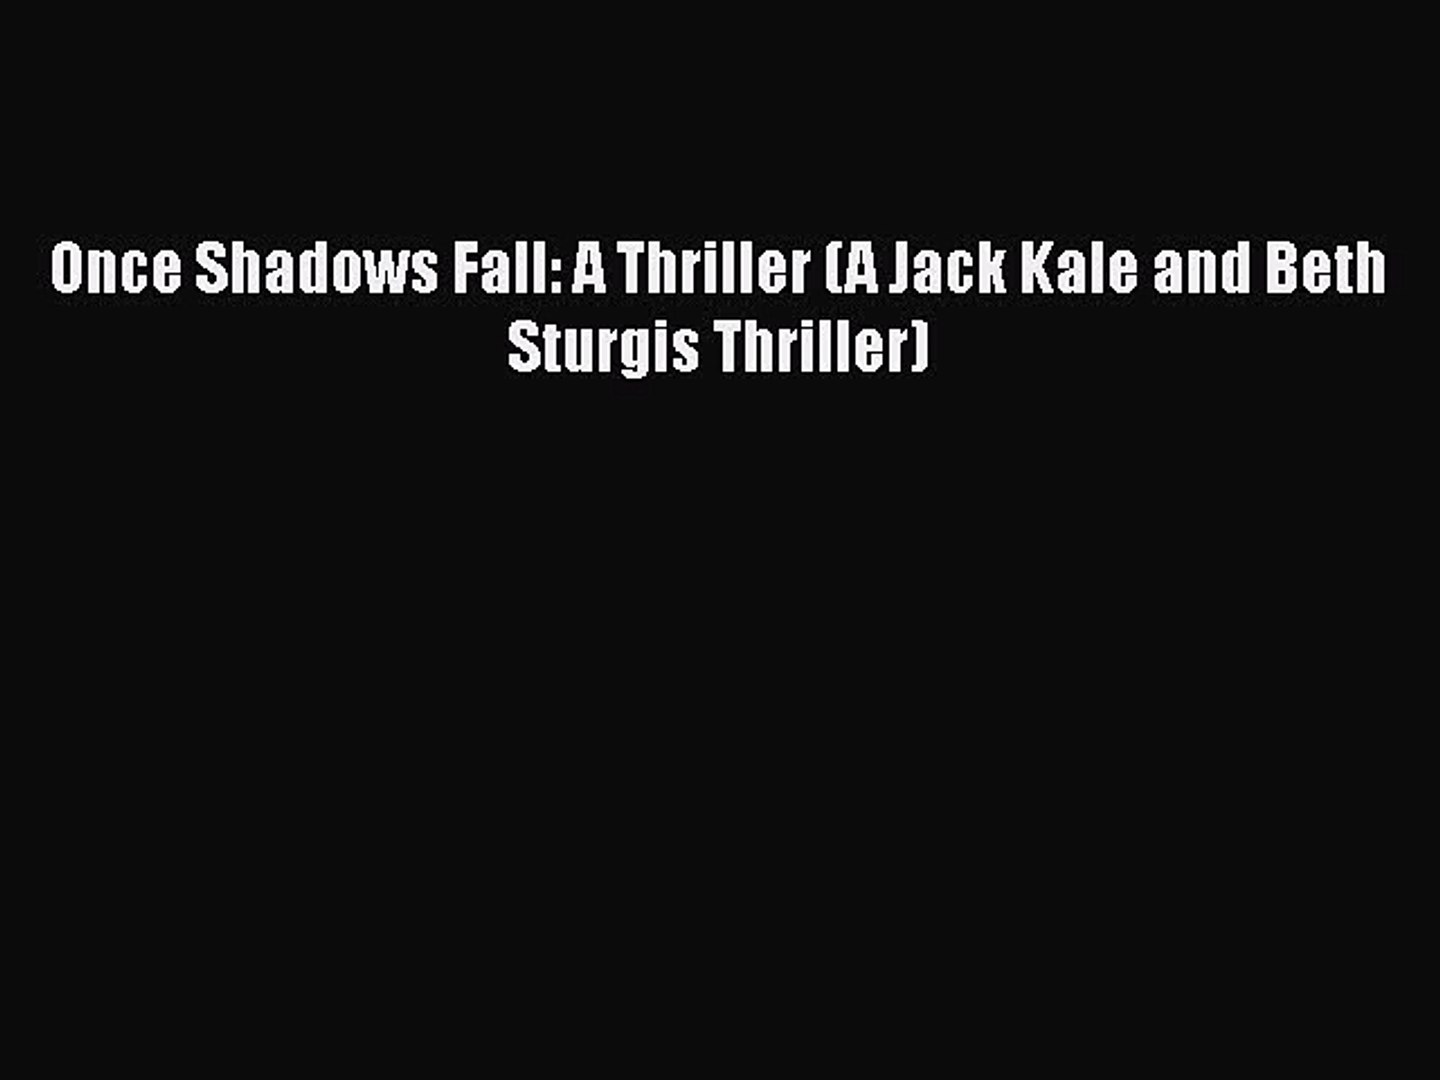 Download Once Shadows Fall: A Thriller (A Jack Kale and Beth Sturgis Thriller)  Read Online